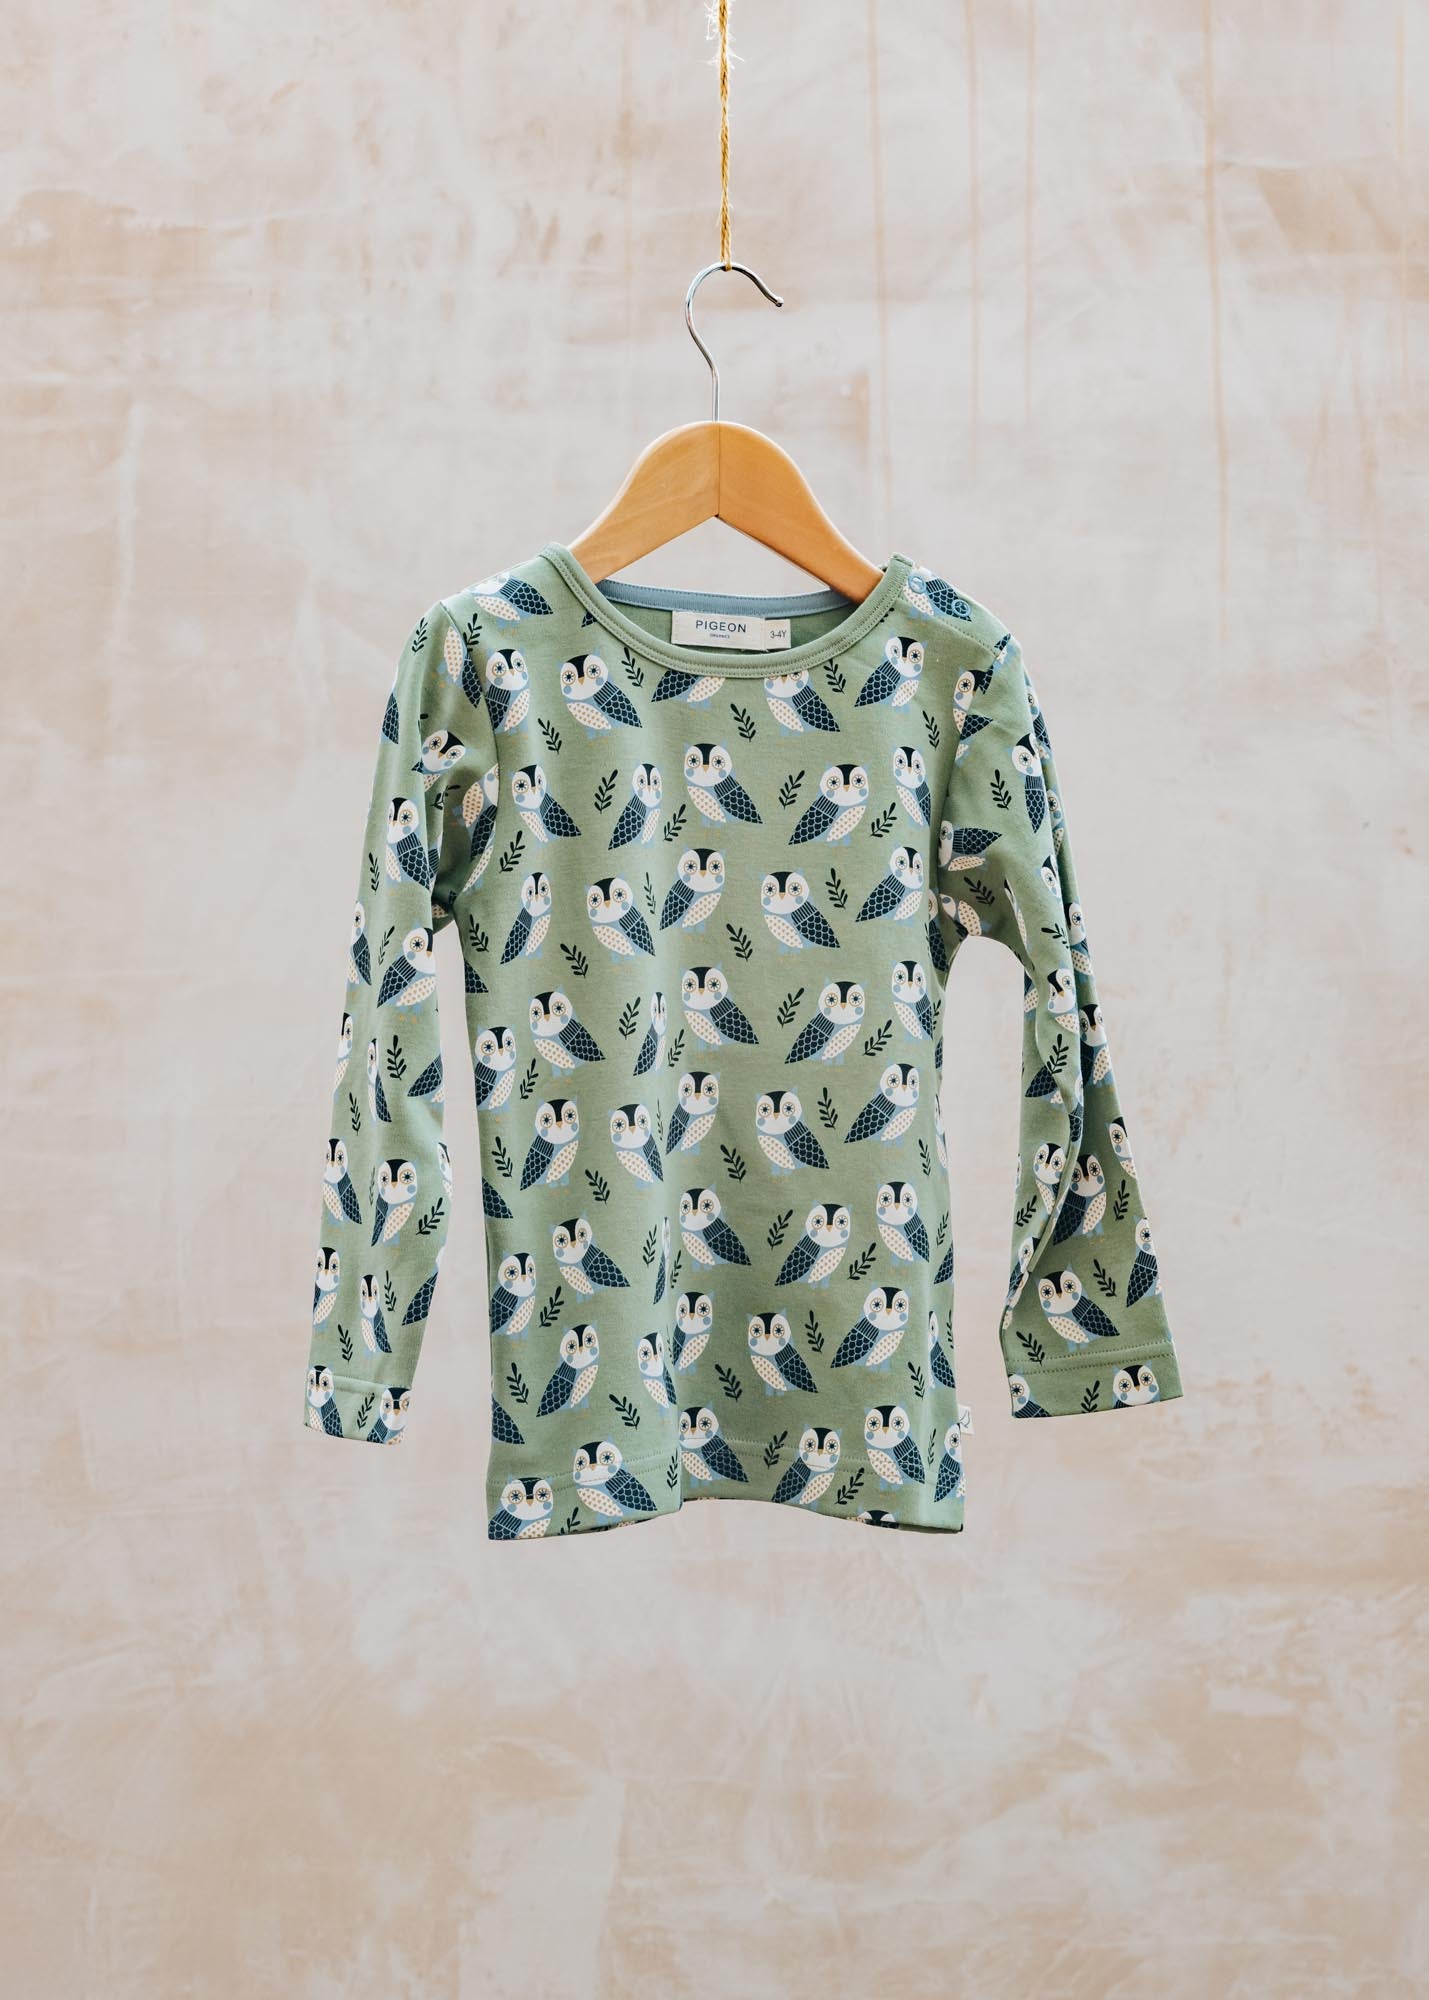 Pigeon Organics Children's Long Sleeved T-Shirt in Green with Owls